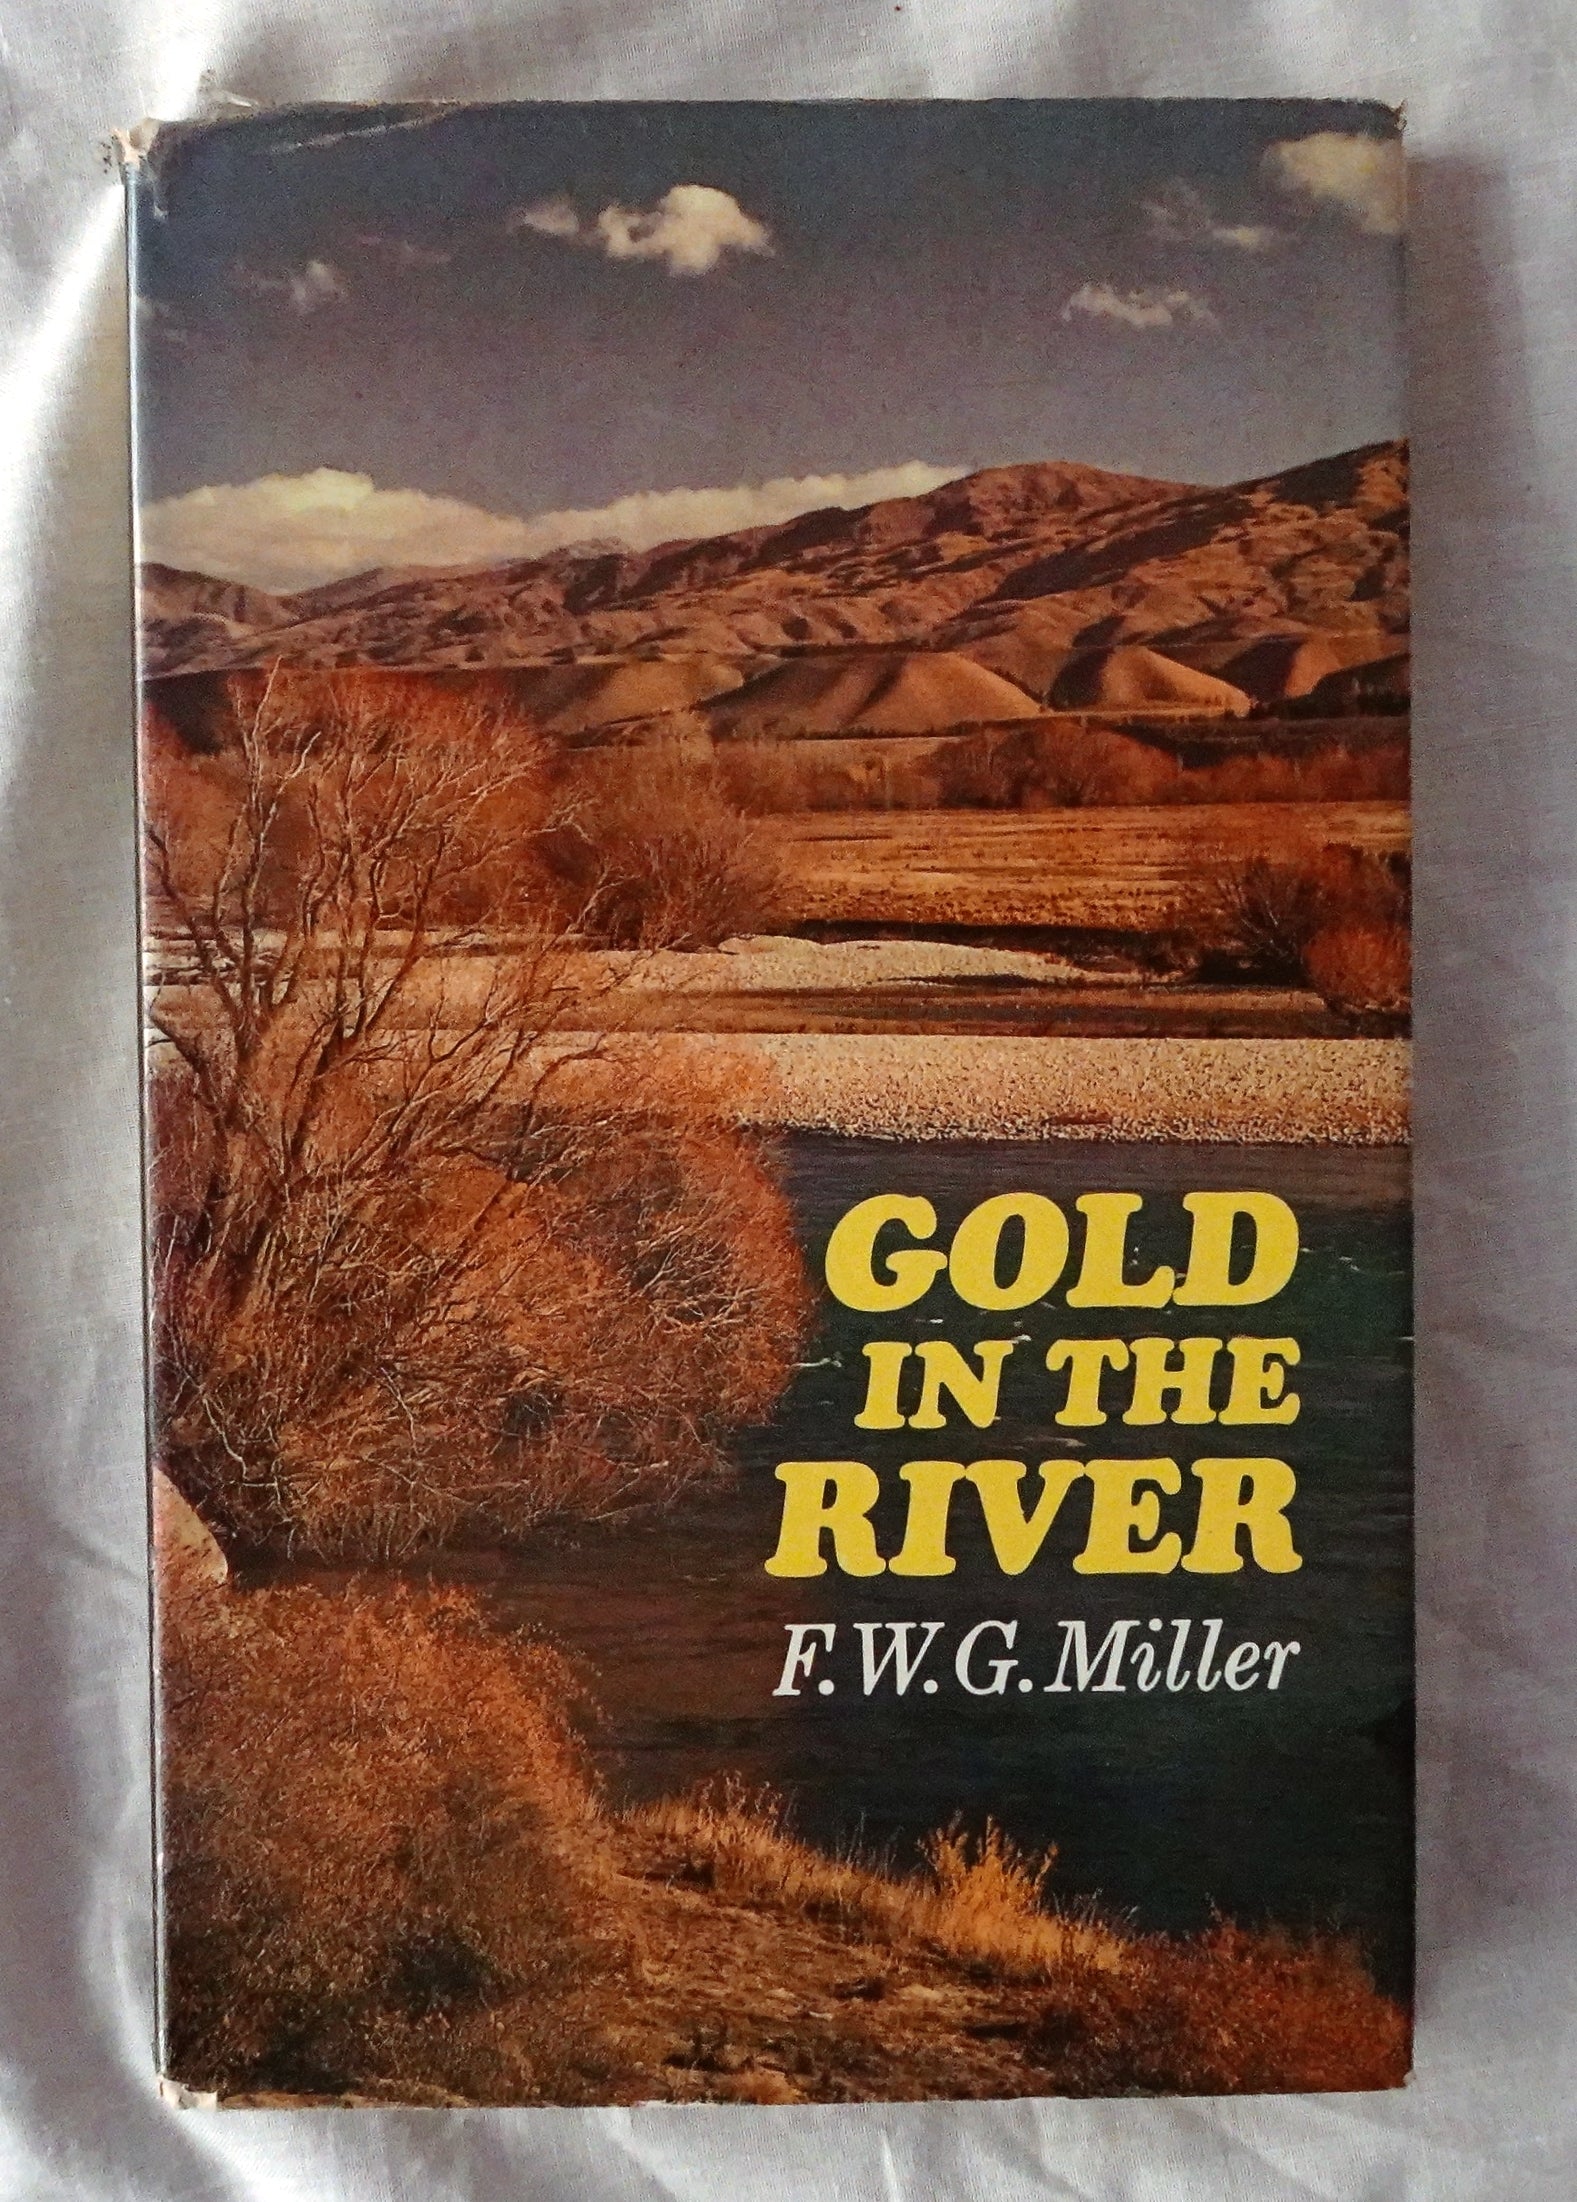 Gold in the River  by F. W. G. Miller  Illustrations by John Husband